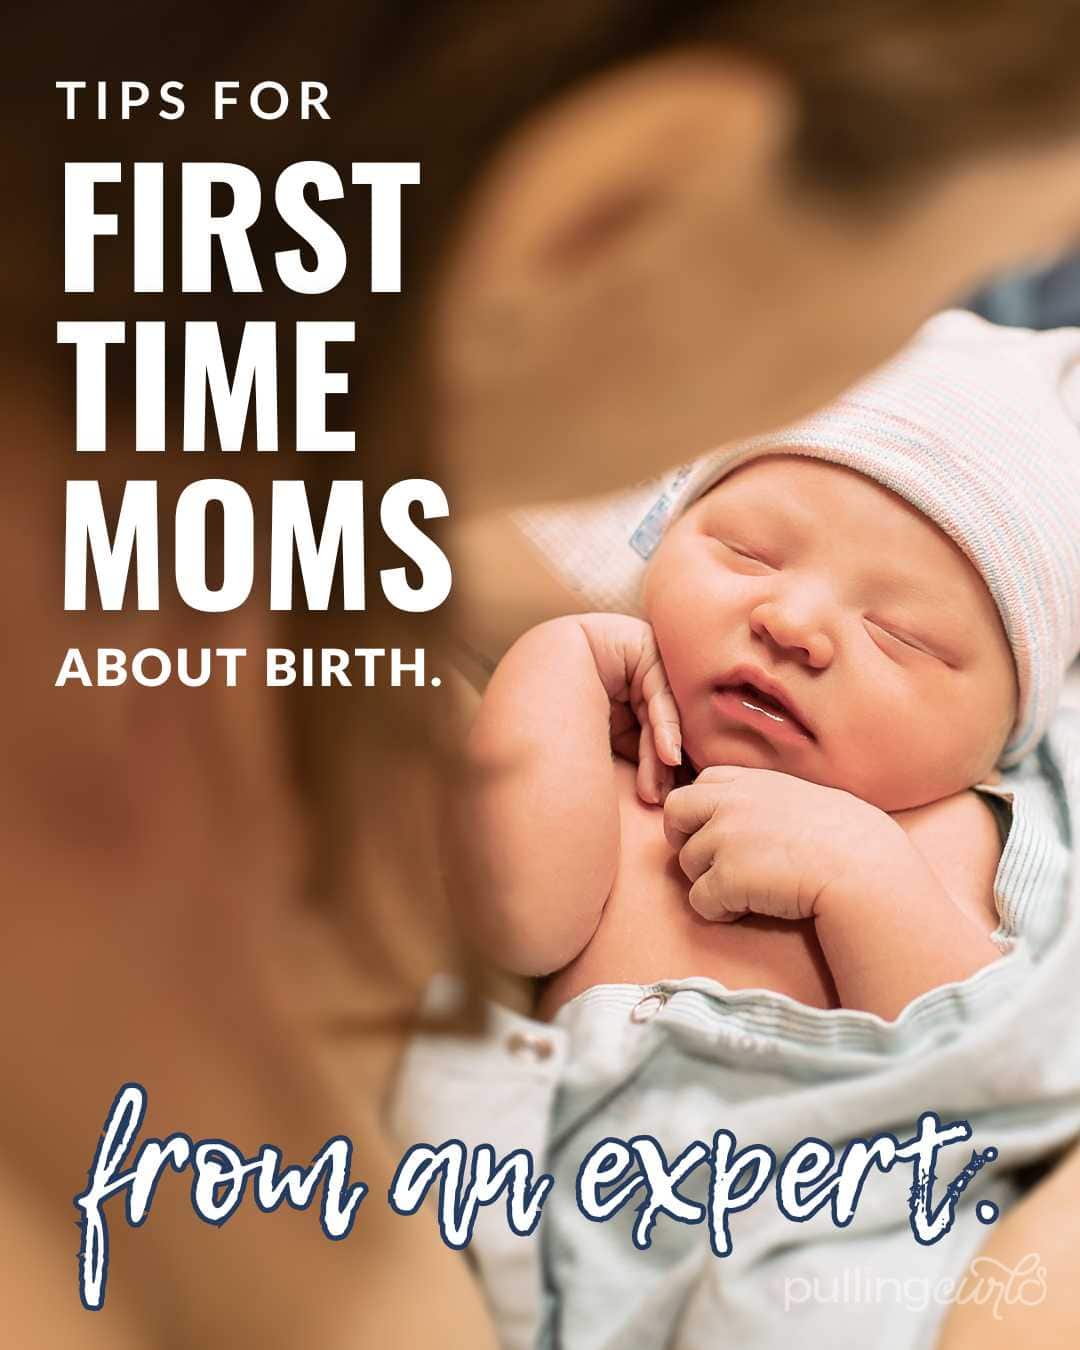 mom and a newborn / tips for first time moms about birth from an expert. via @pullingcurls